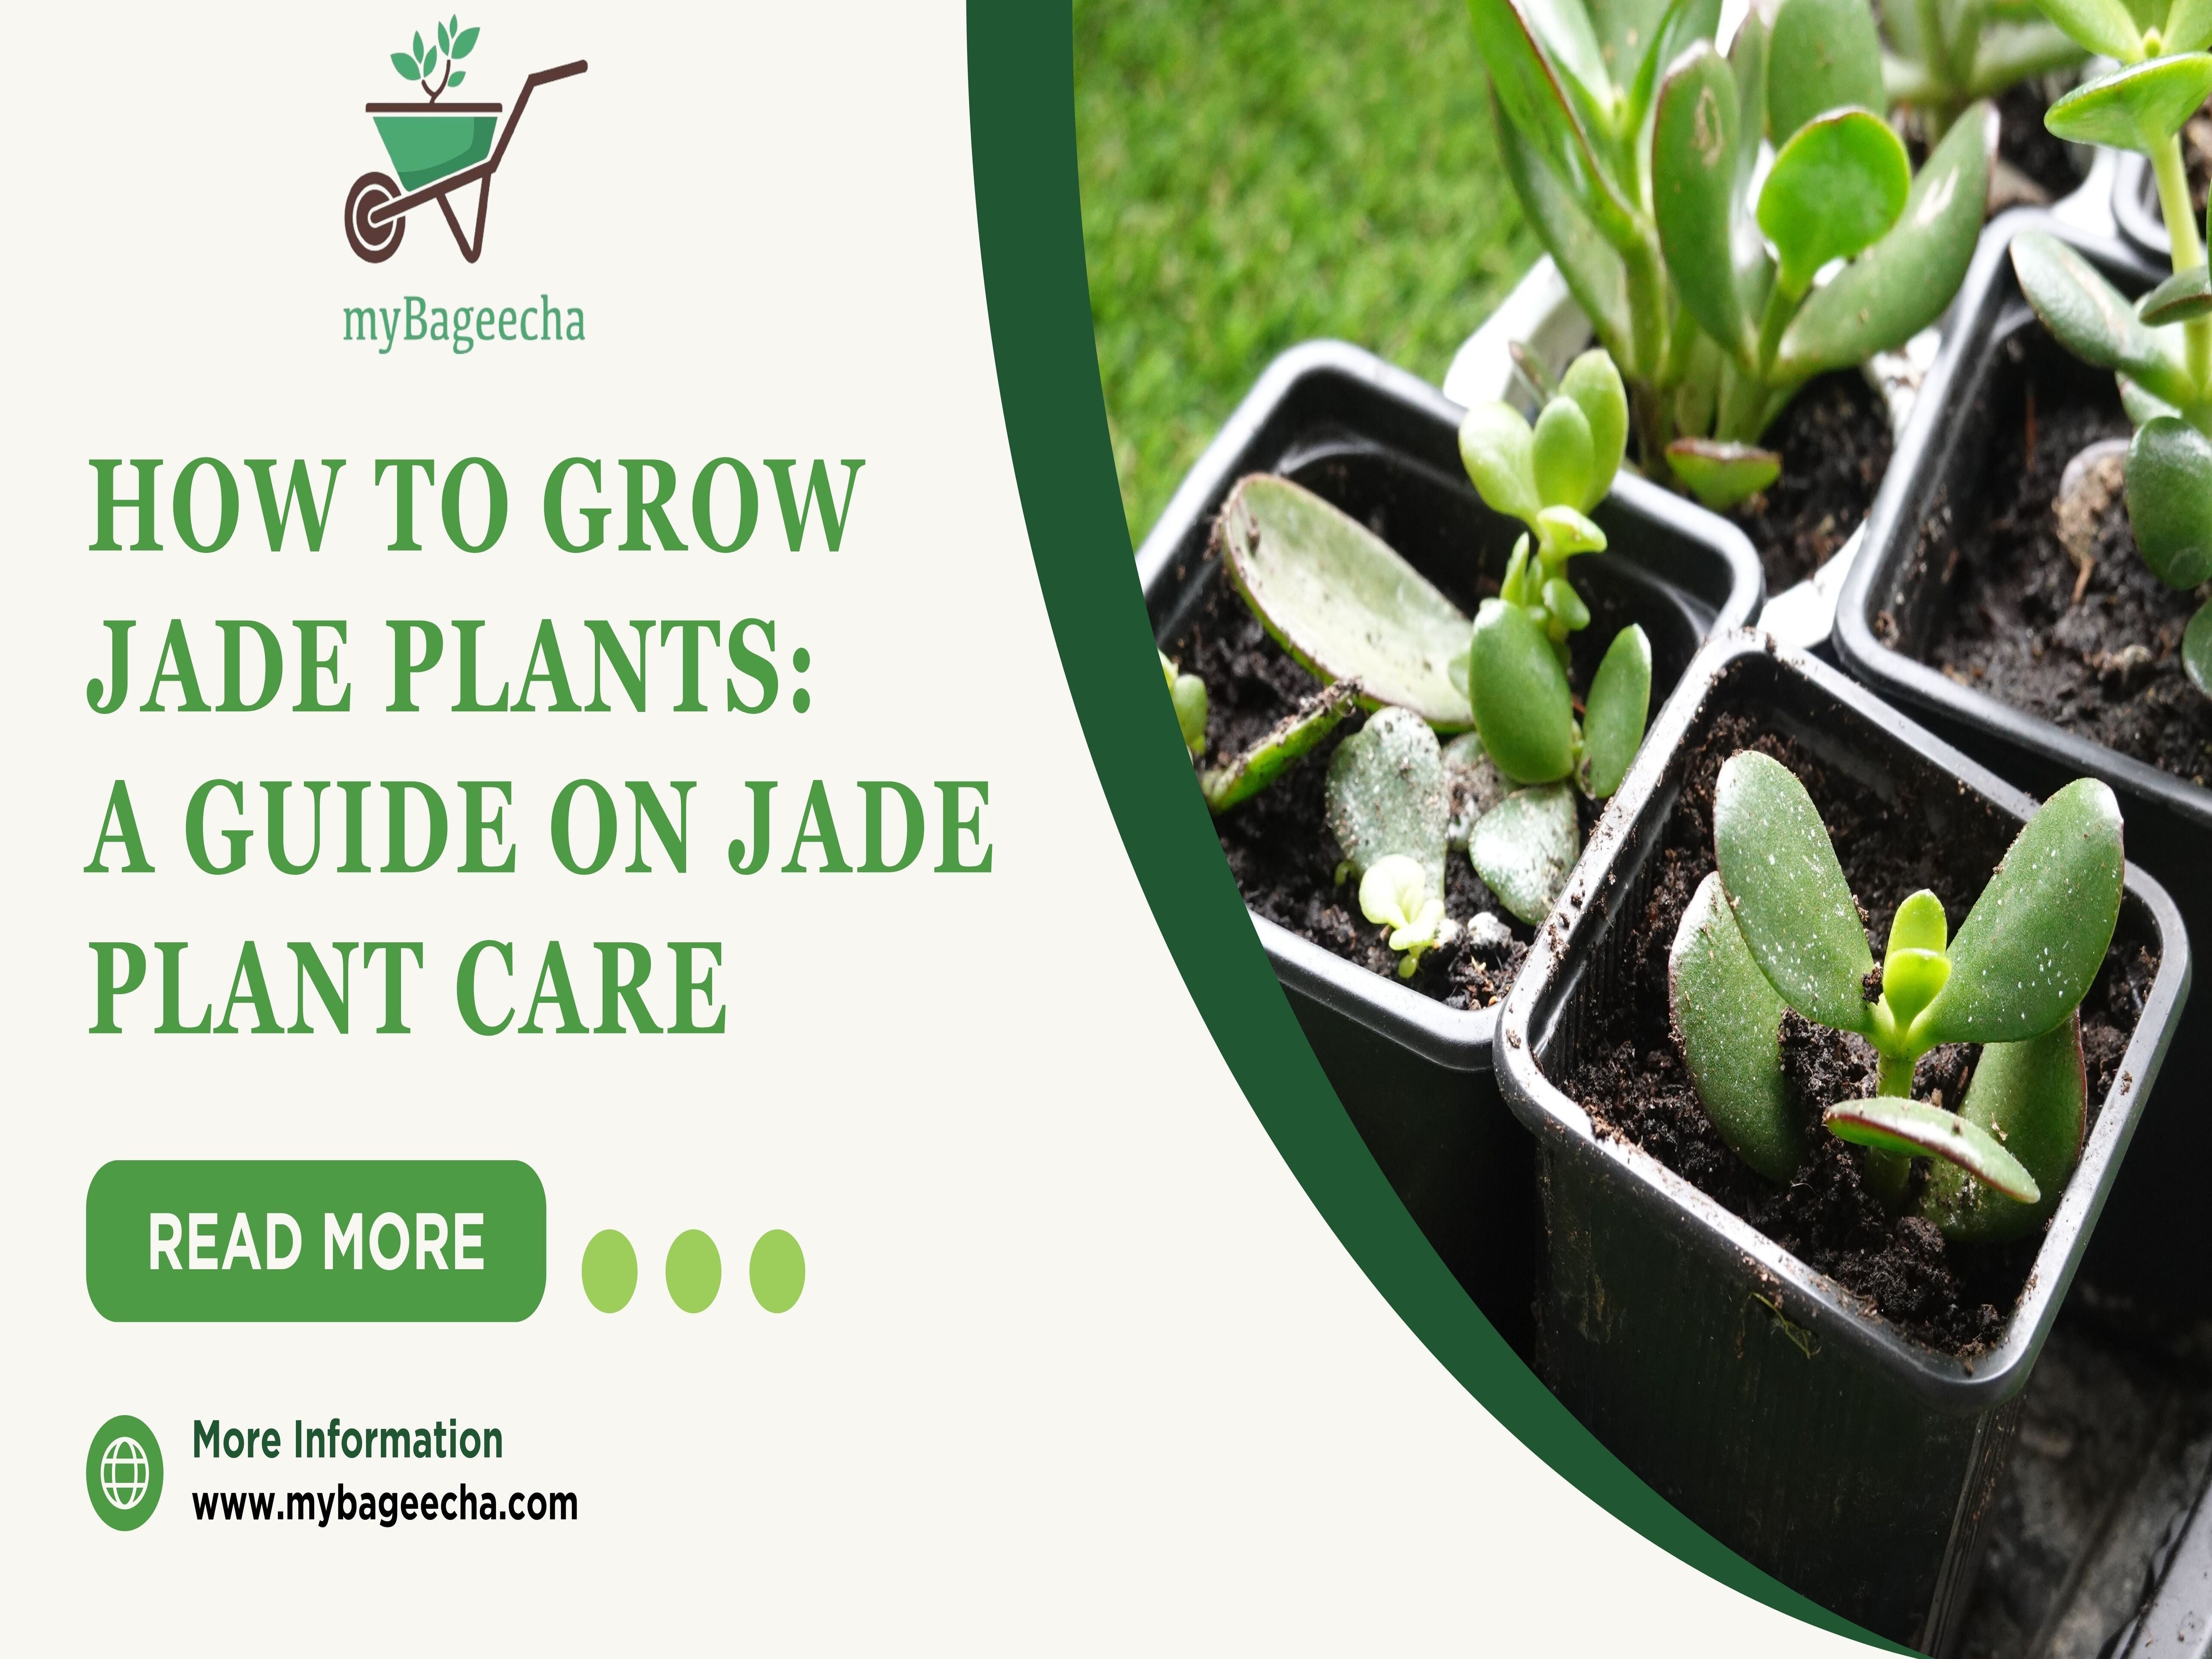 How to Grow Jade Plants: A Guide on Jade Plant Care